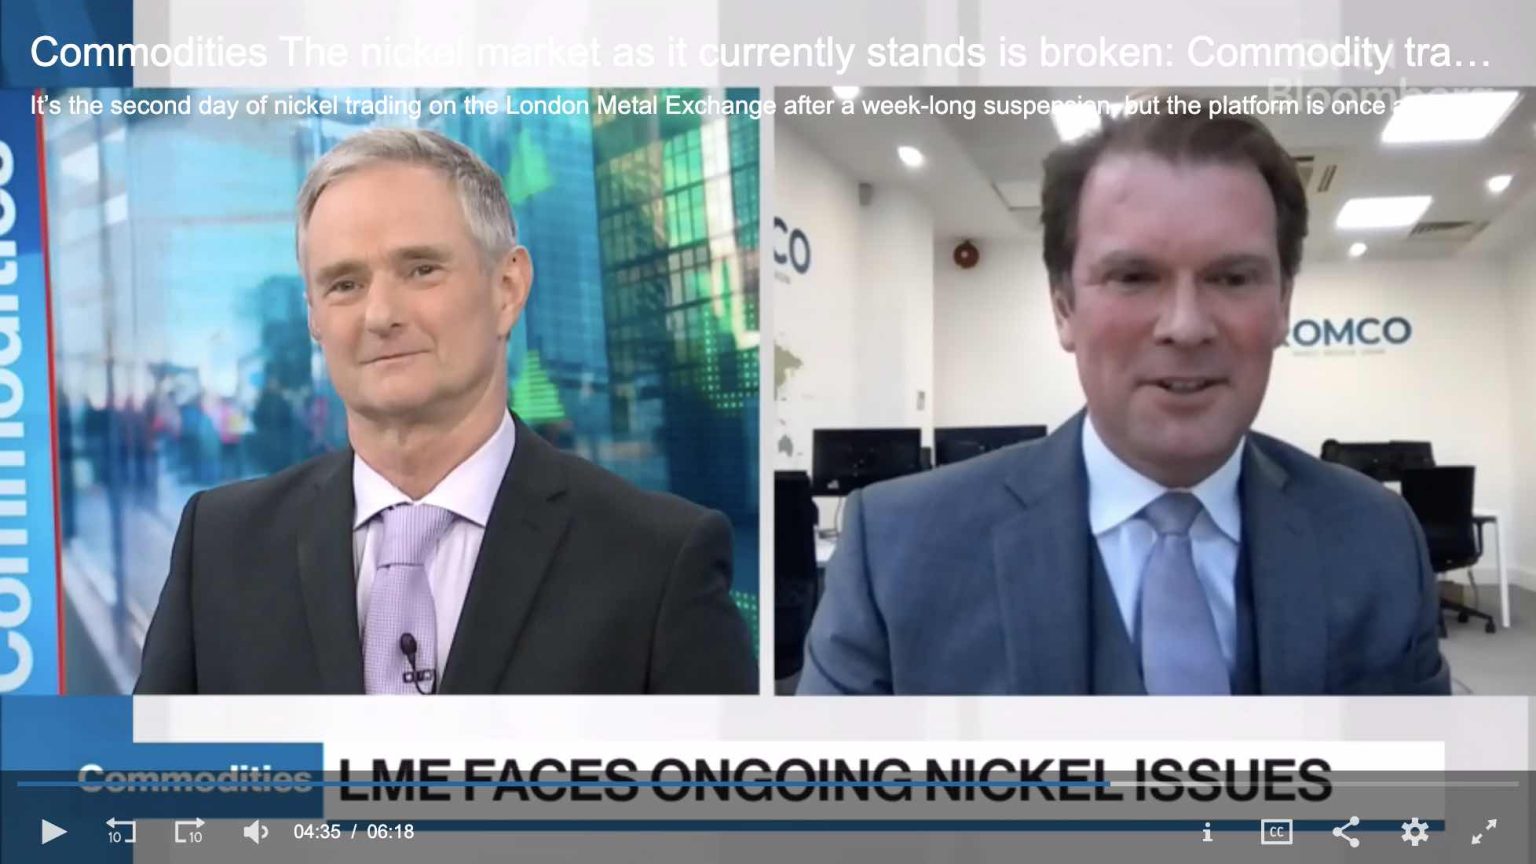 BNN Bloomberg — LIVE — The Nickel Market As It Currently Stands Is Broken: Romco Group Head of Trading, Keith Wildie, Discussing LME Issues